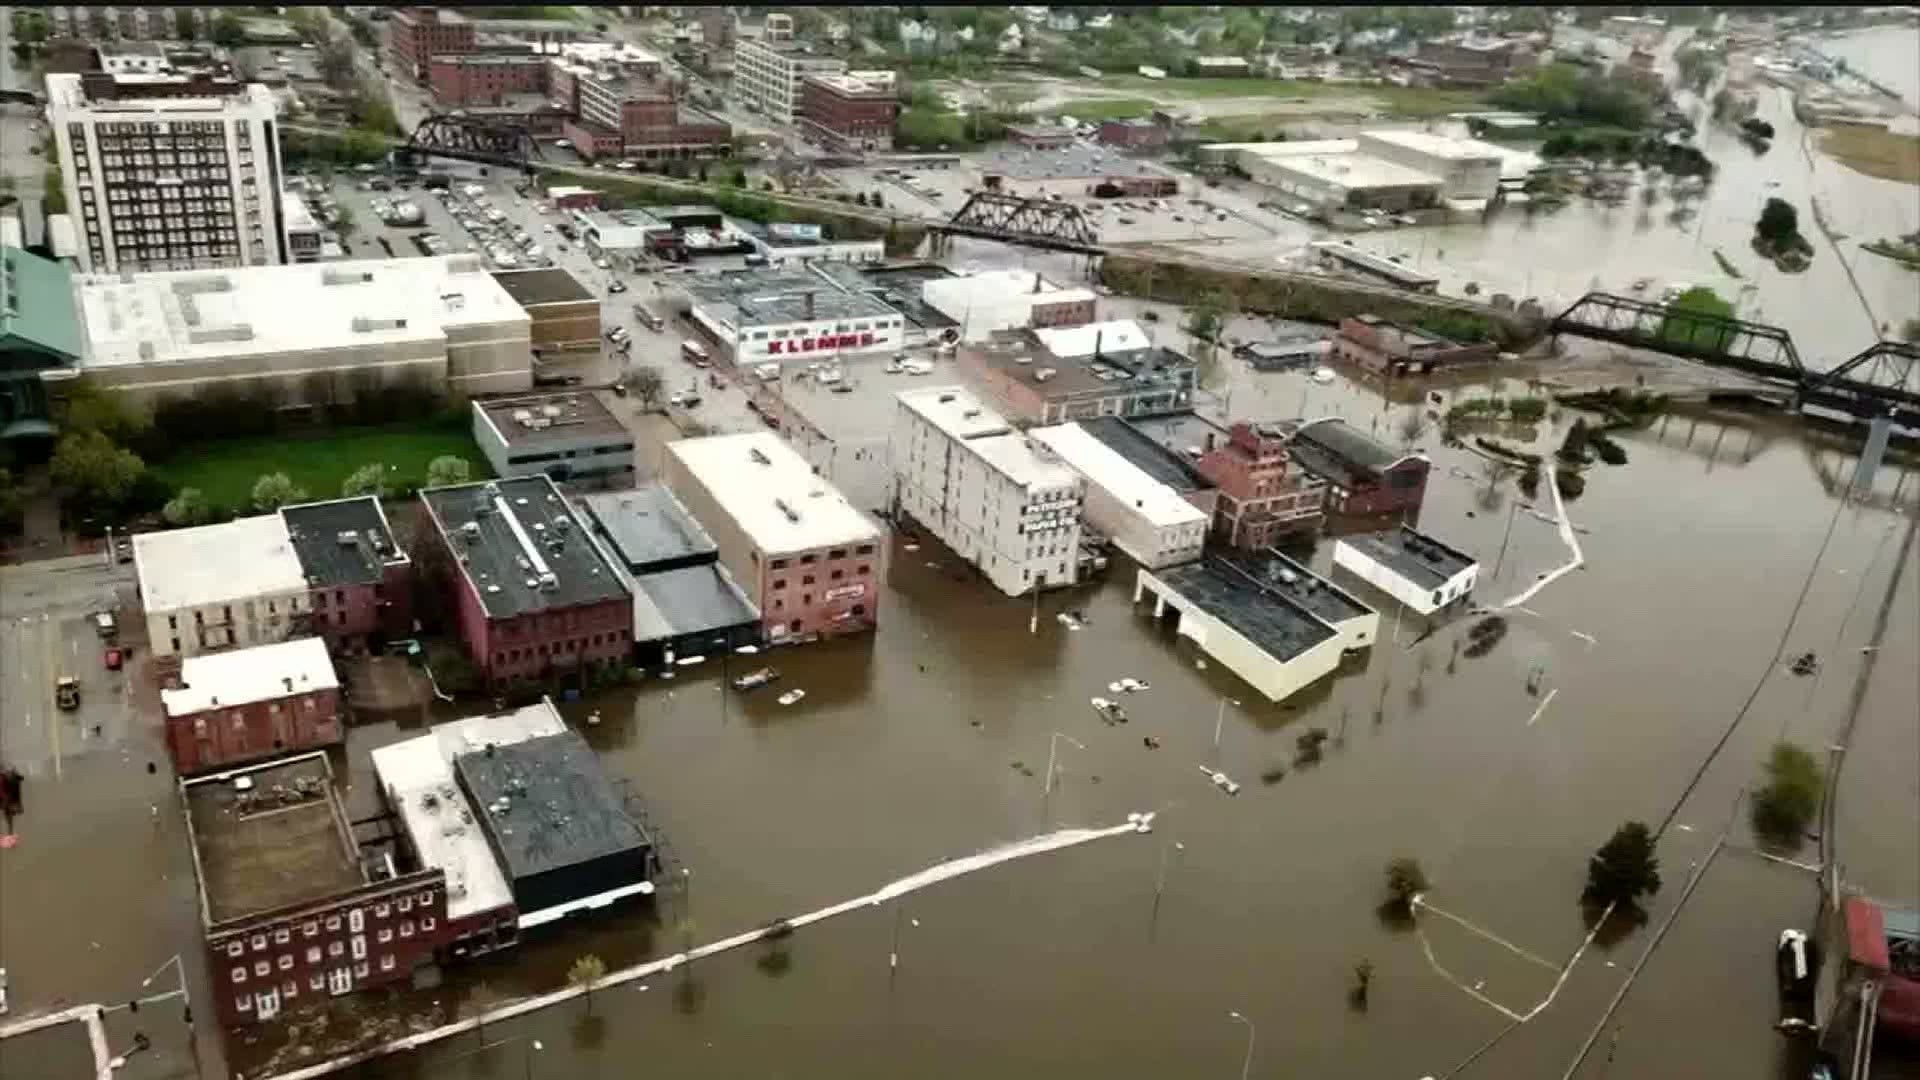 The historic flood breach downtown took place April 30th of 2019.